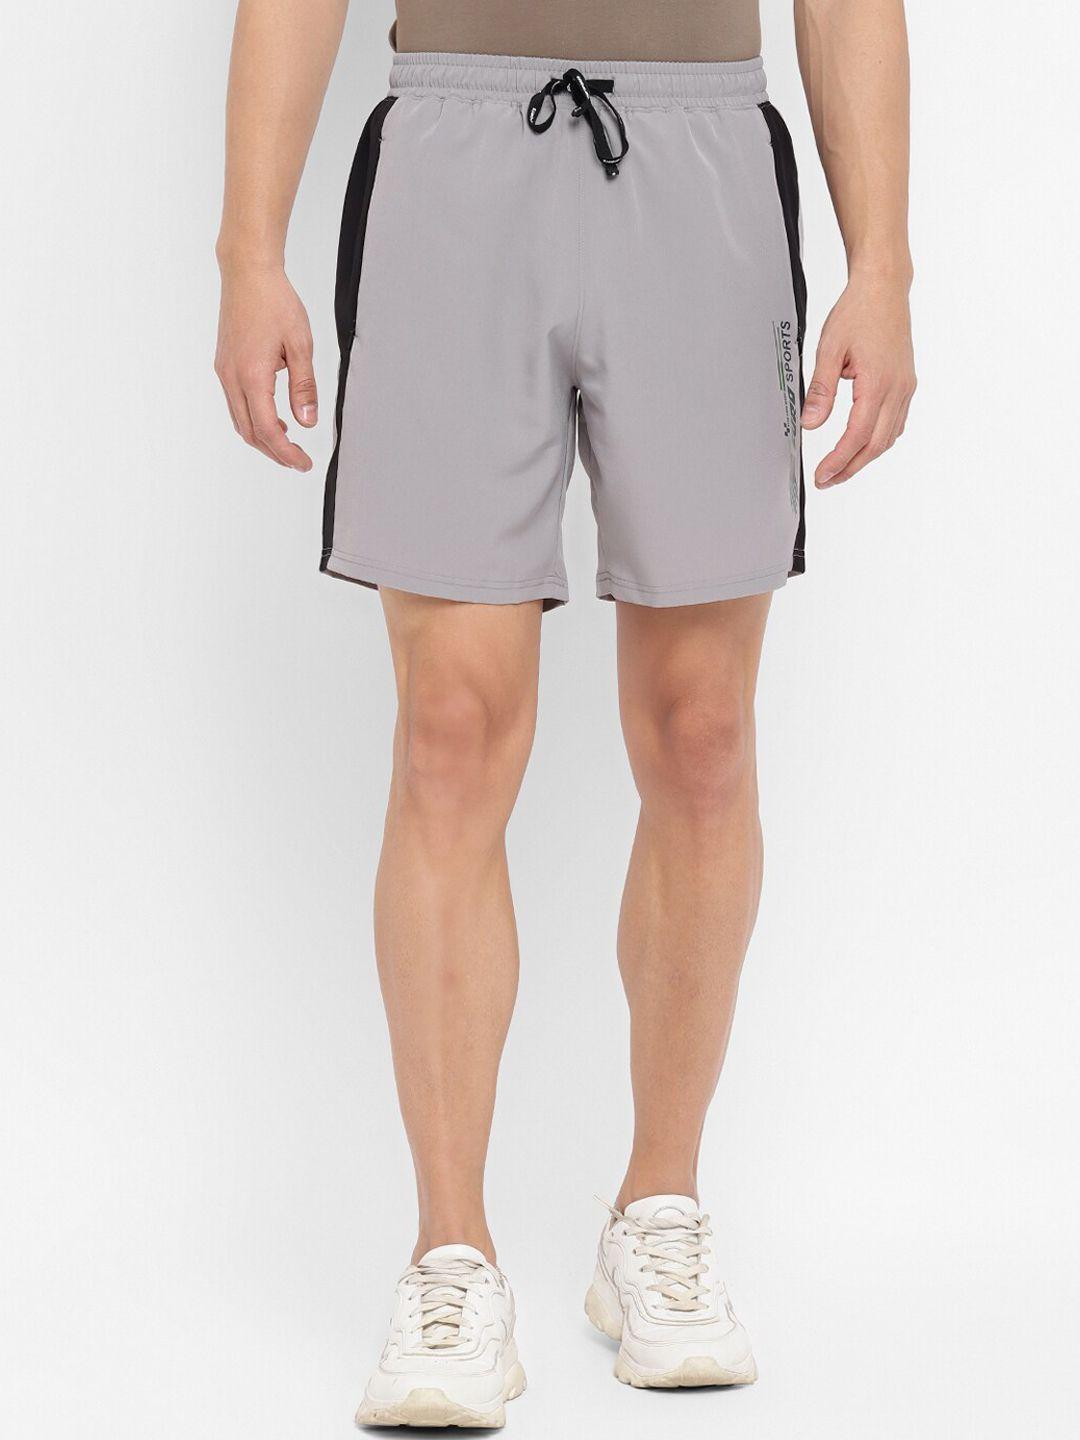 furo-by-red-chief-men-mid-rise-training-or-gym-sports-shorts